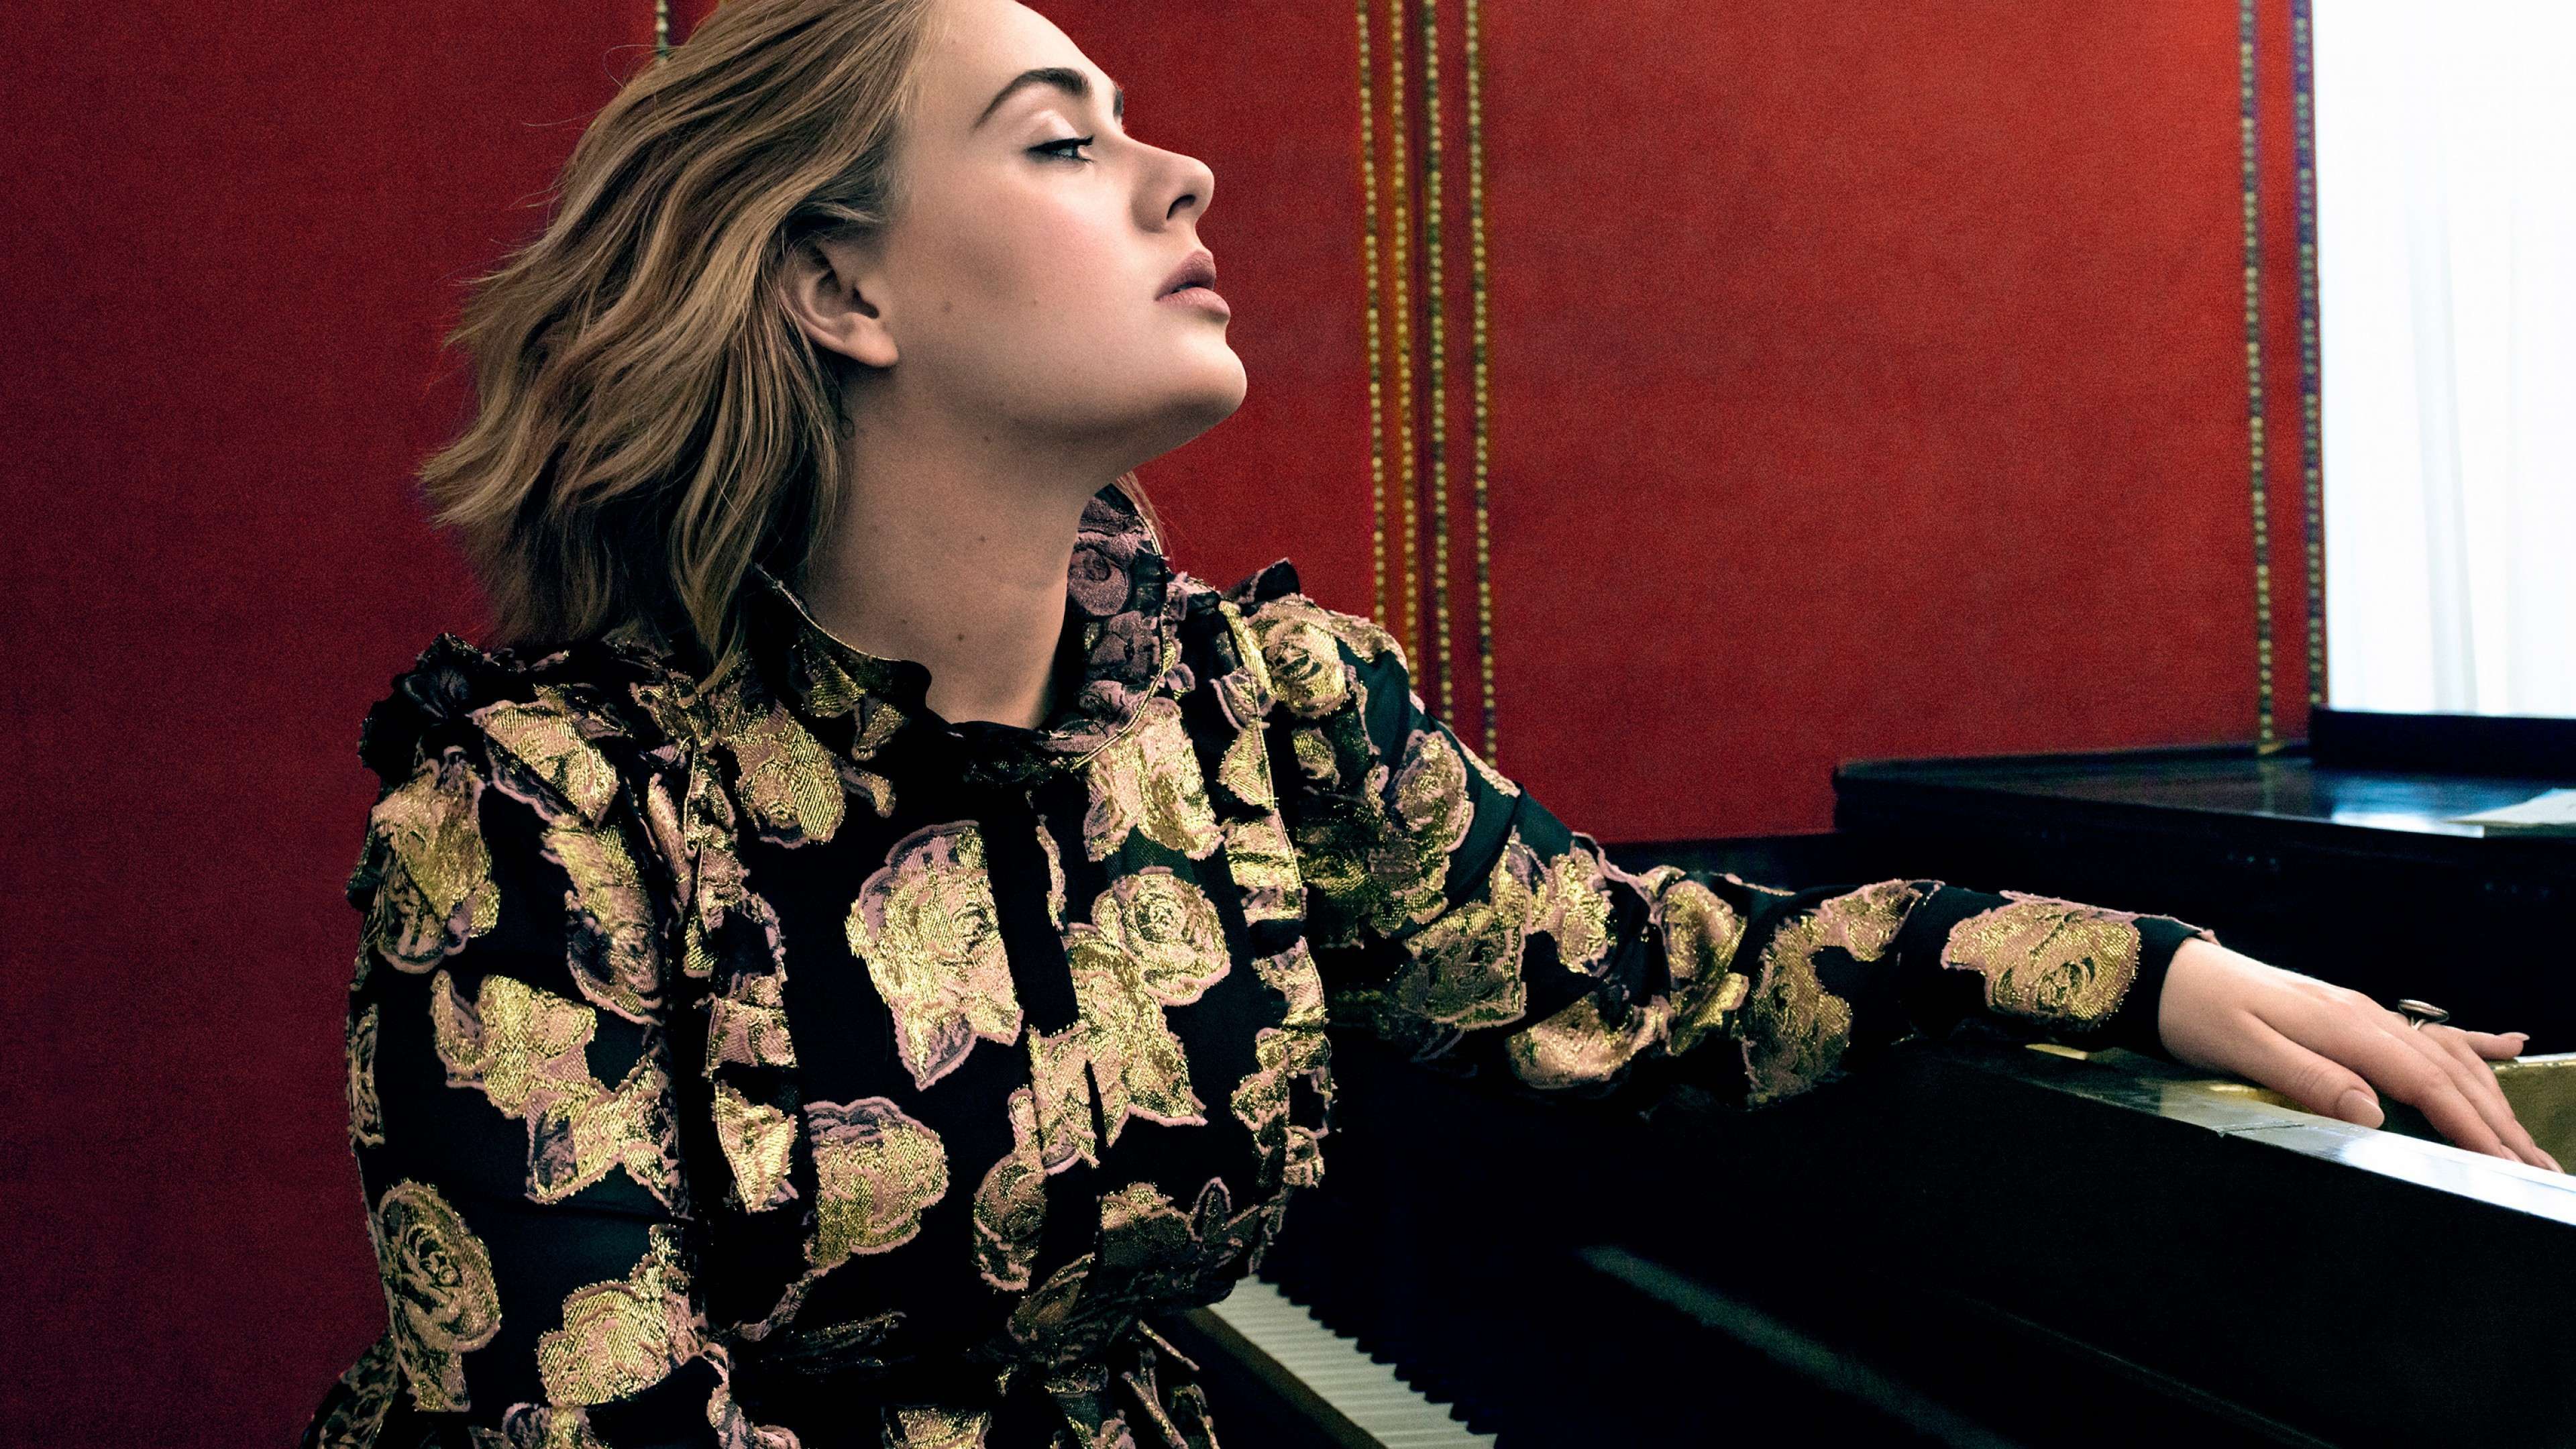 adele 2018 wallpaper and Background Image HD